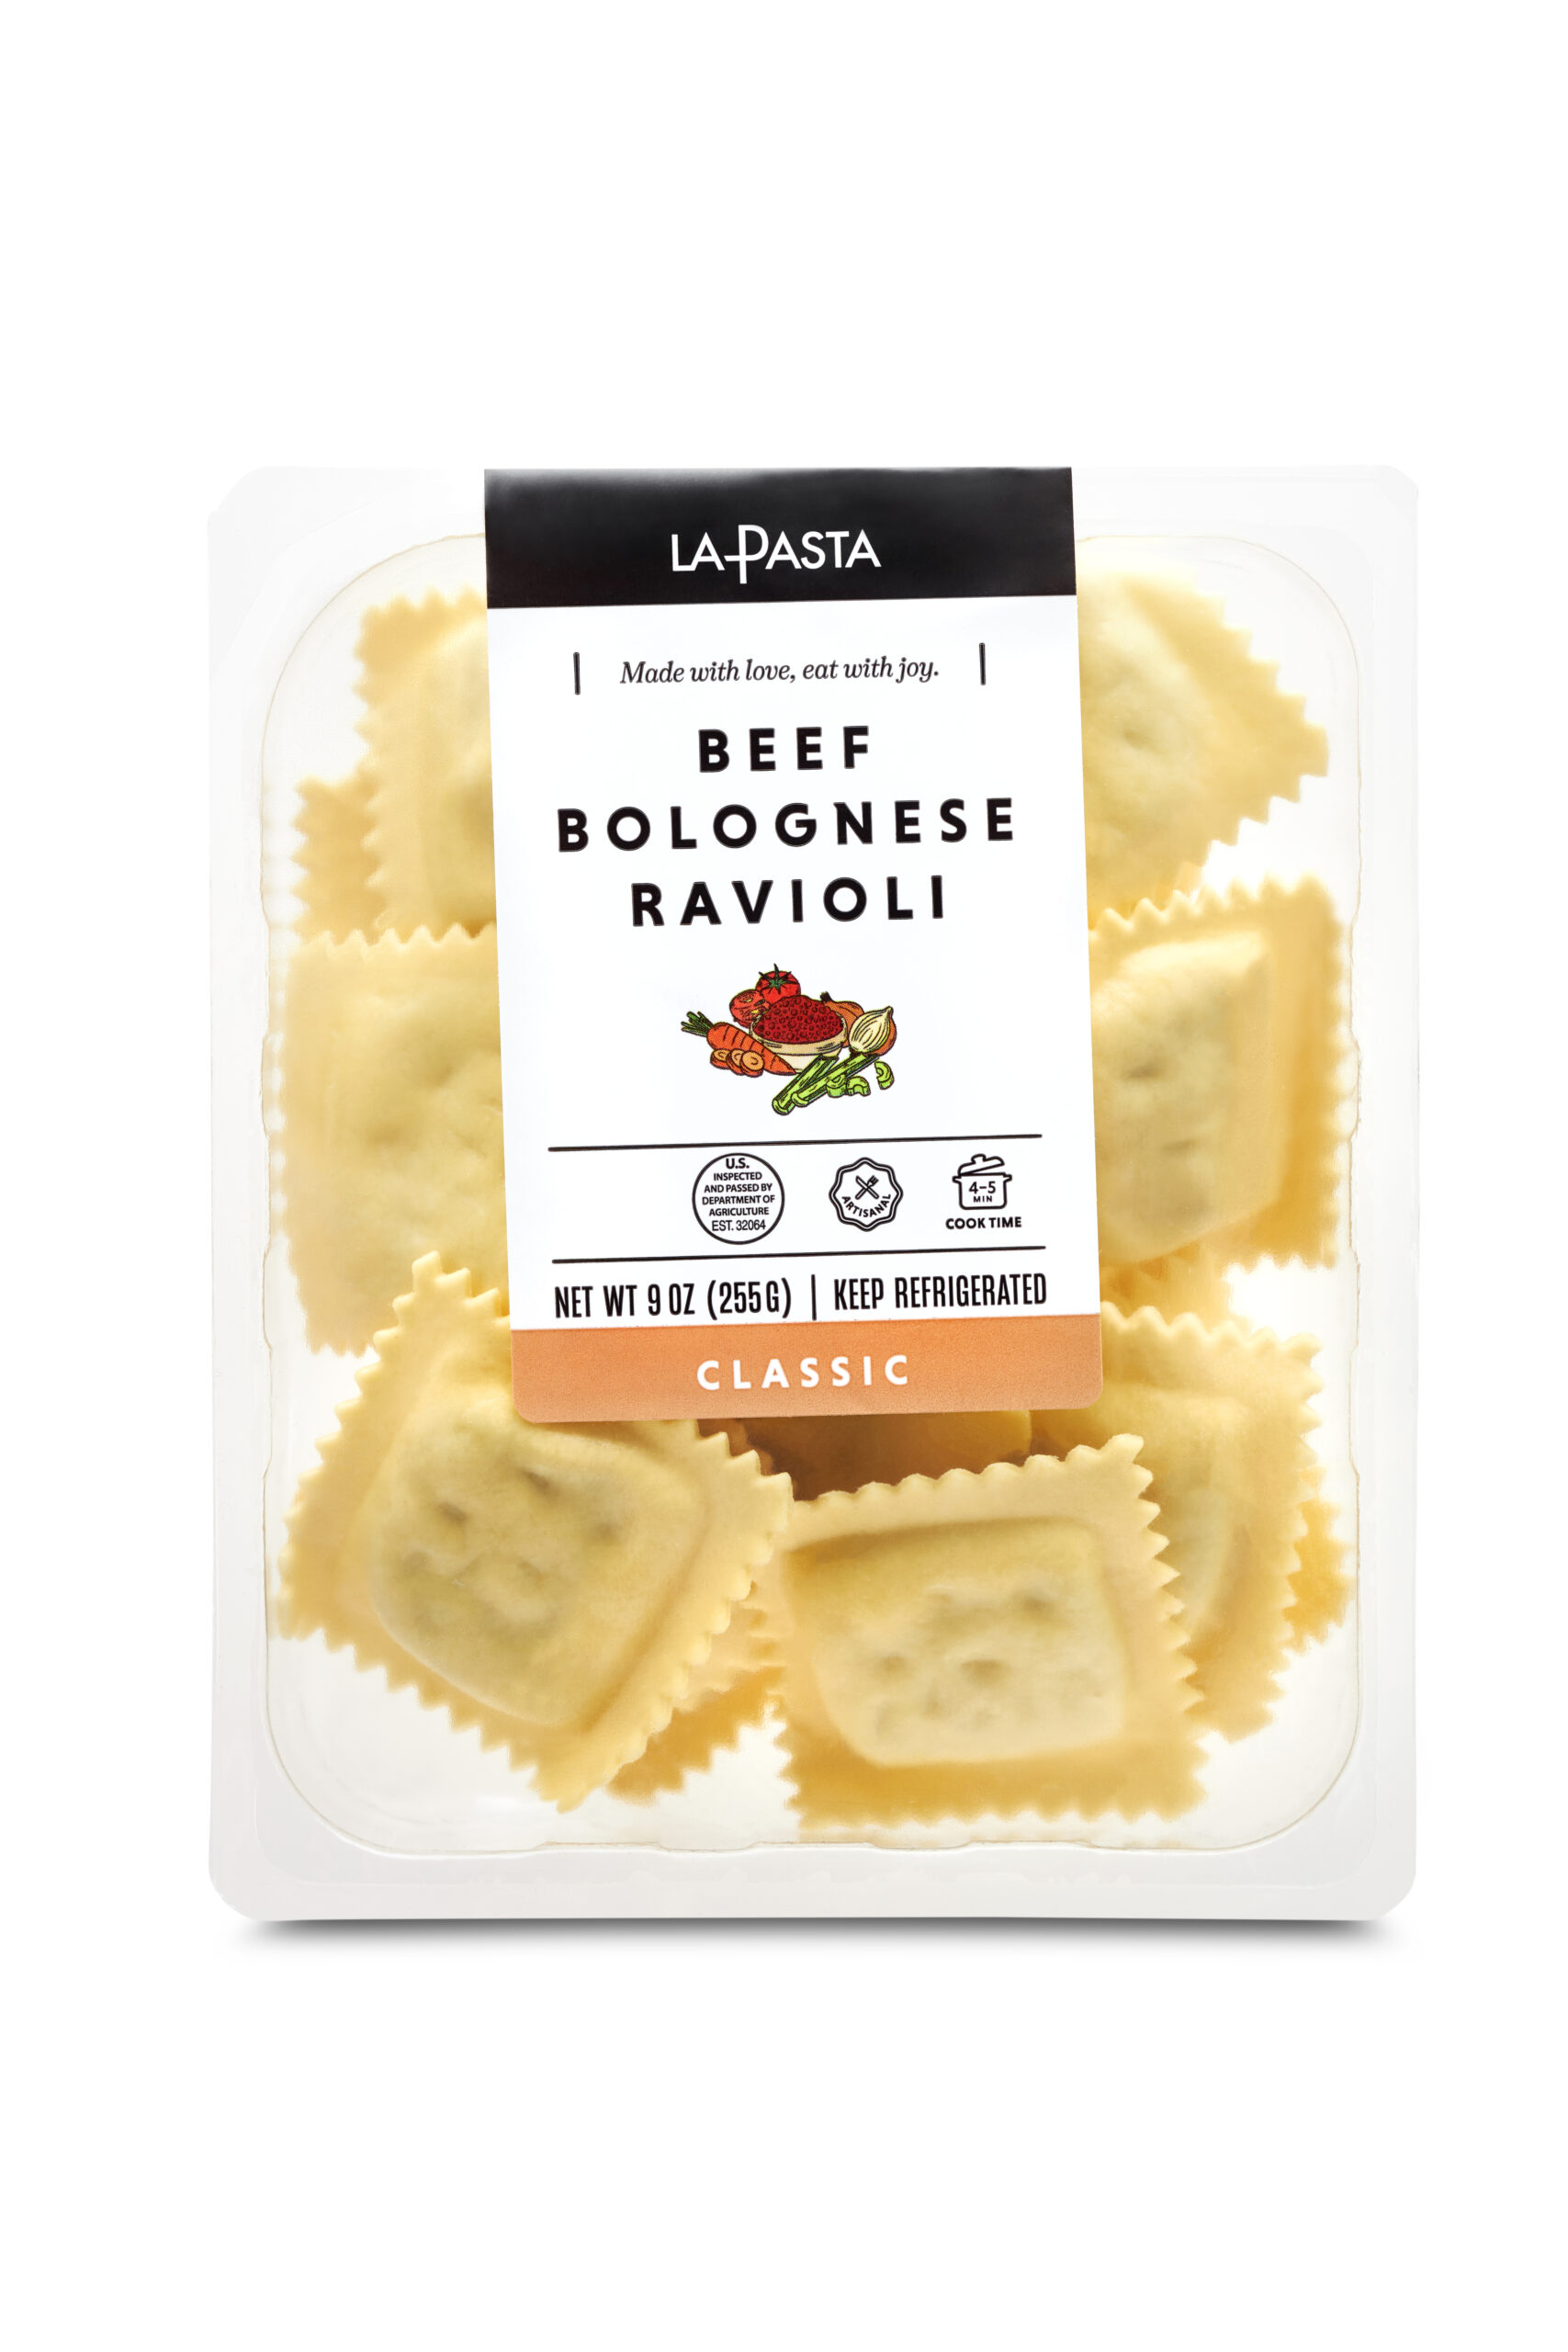 A package of ravioli with meat and cheese.